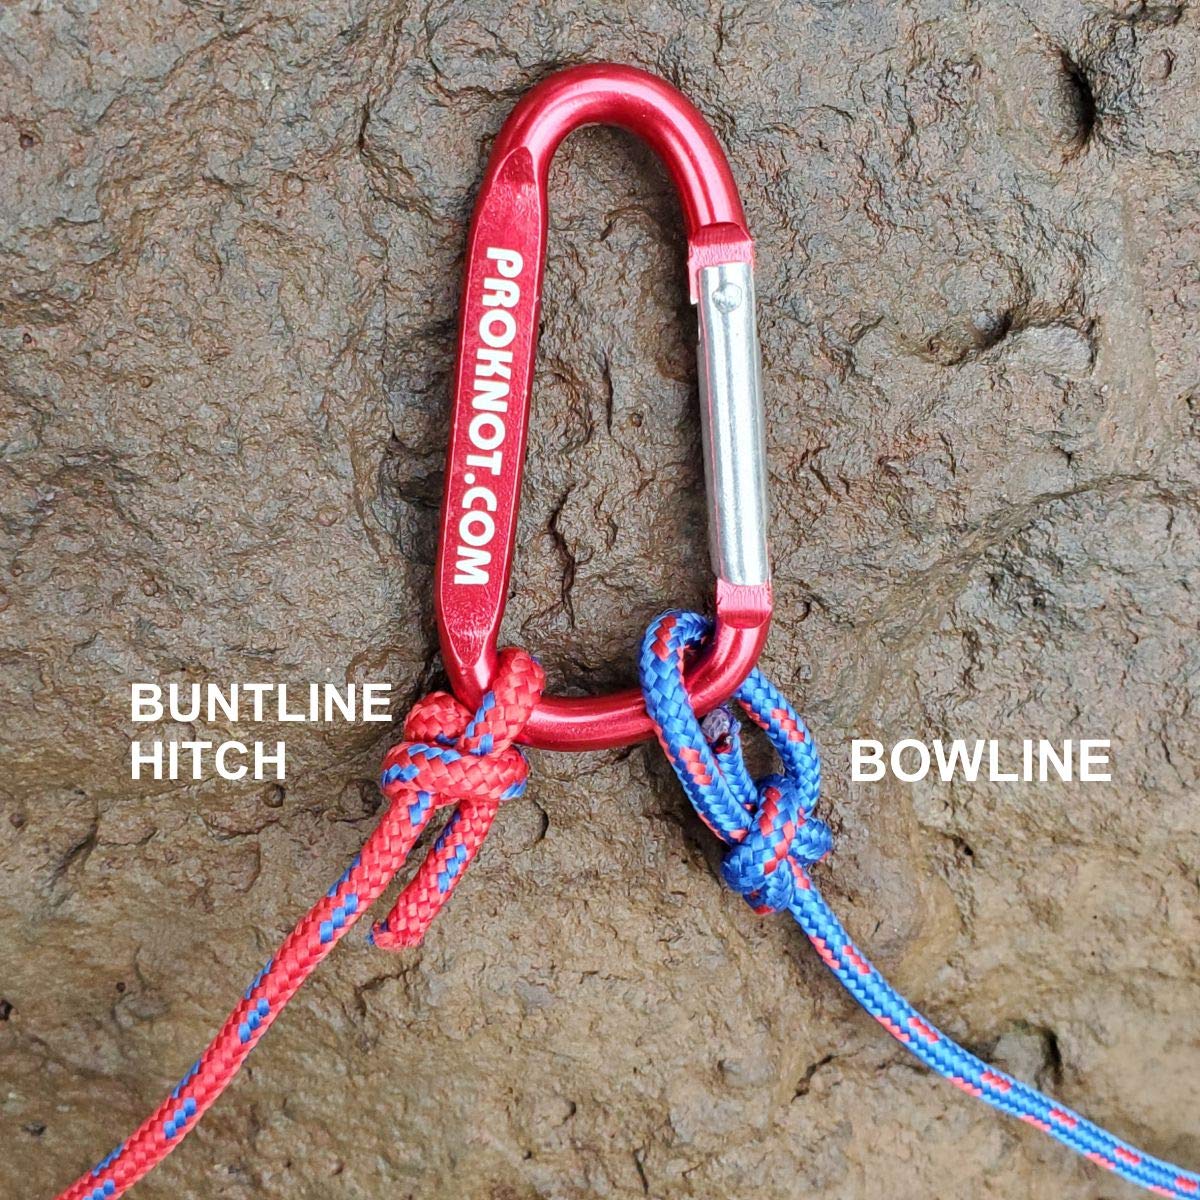 Pro Knot Tying Kit Product Being Used